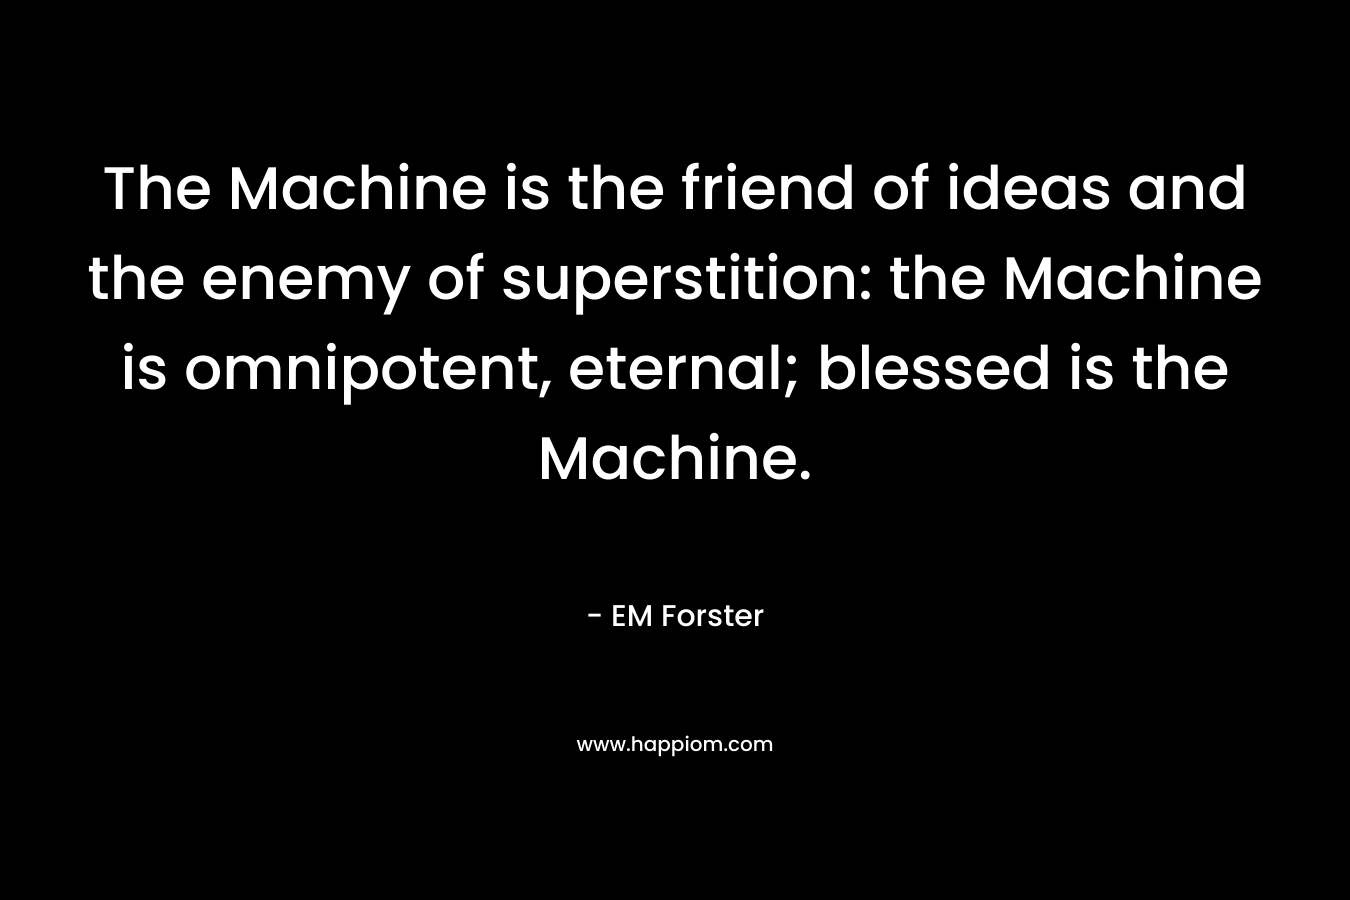 The Machine is the friend of ideas and the enemy of superstition: the Machine is omnipotent, eternal; blessed is the Machine. – EM Forster